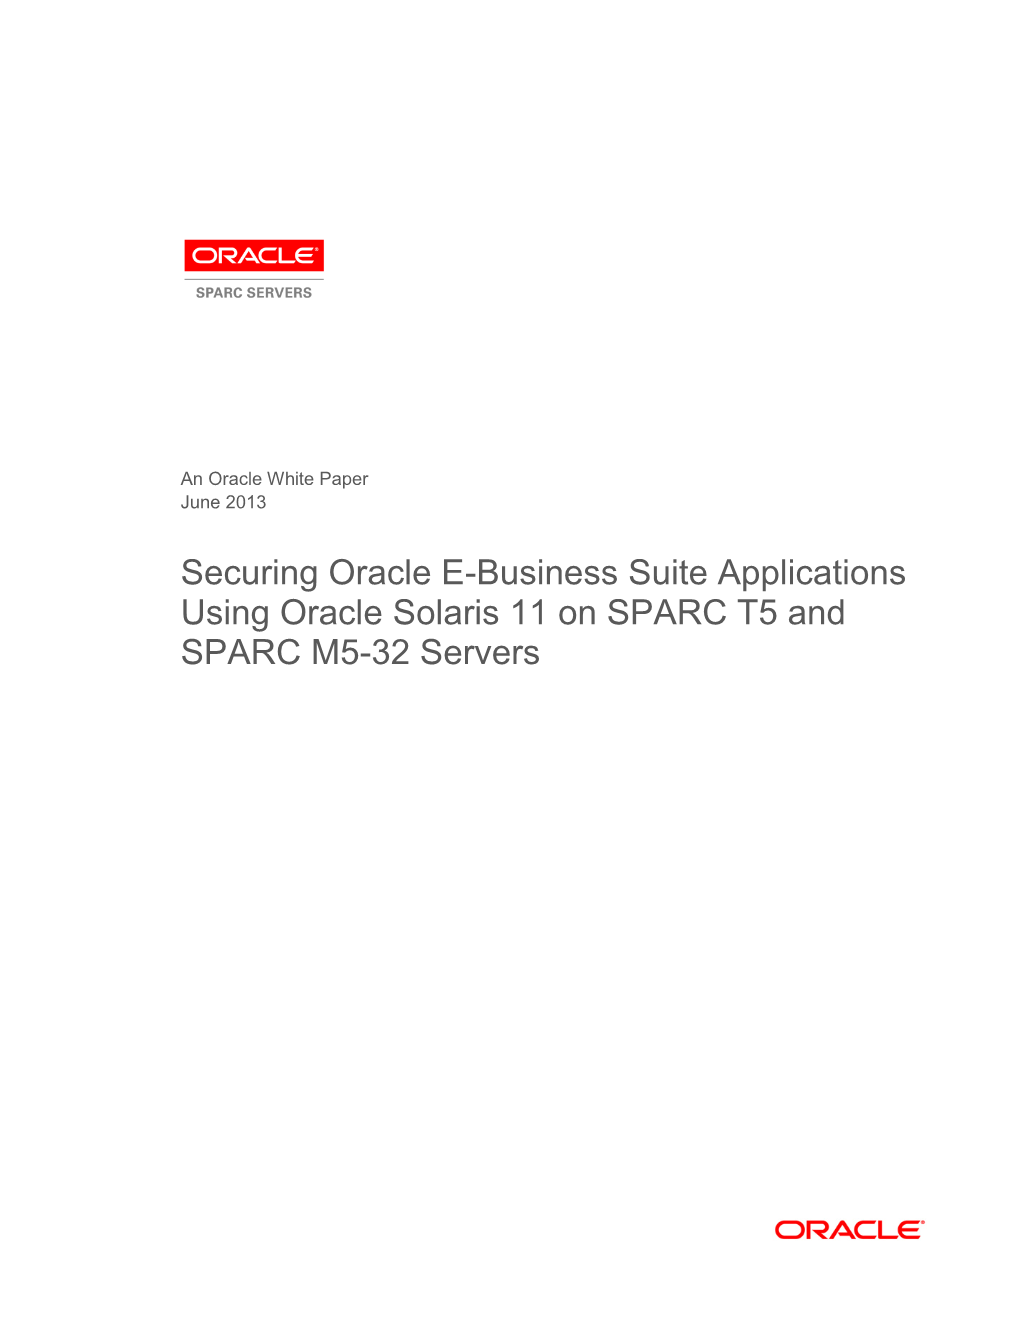 Securing Oracle E-Business Suite Applications Using Oracle Solaris 11 on SPARC T5 and SPARC M5-32 Servers